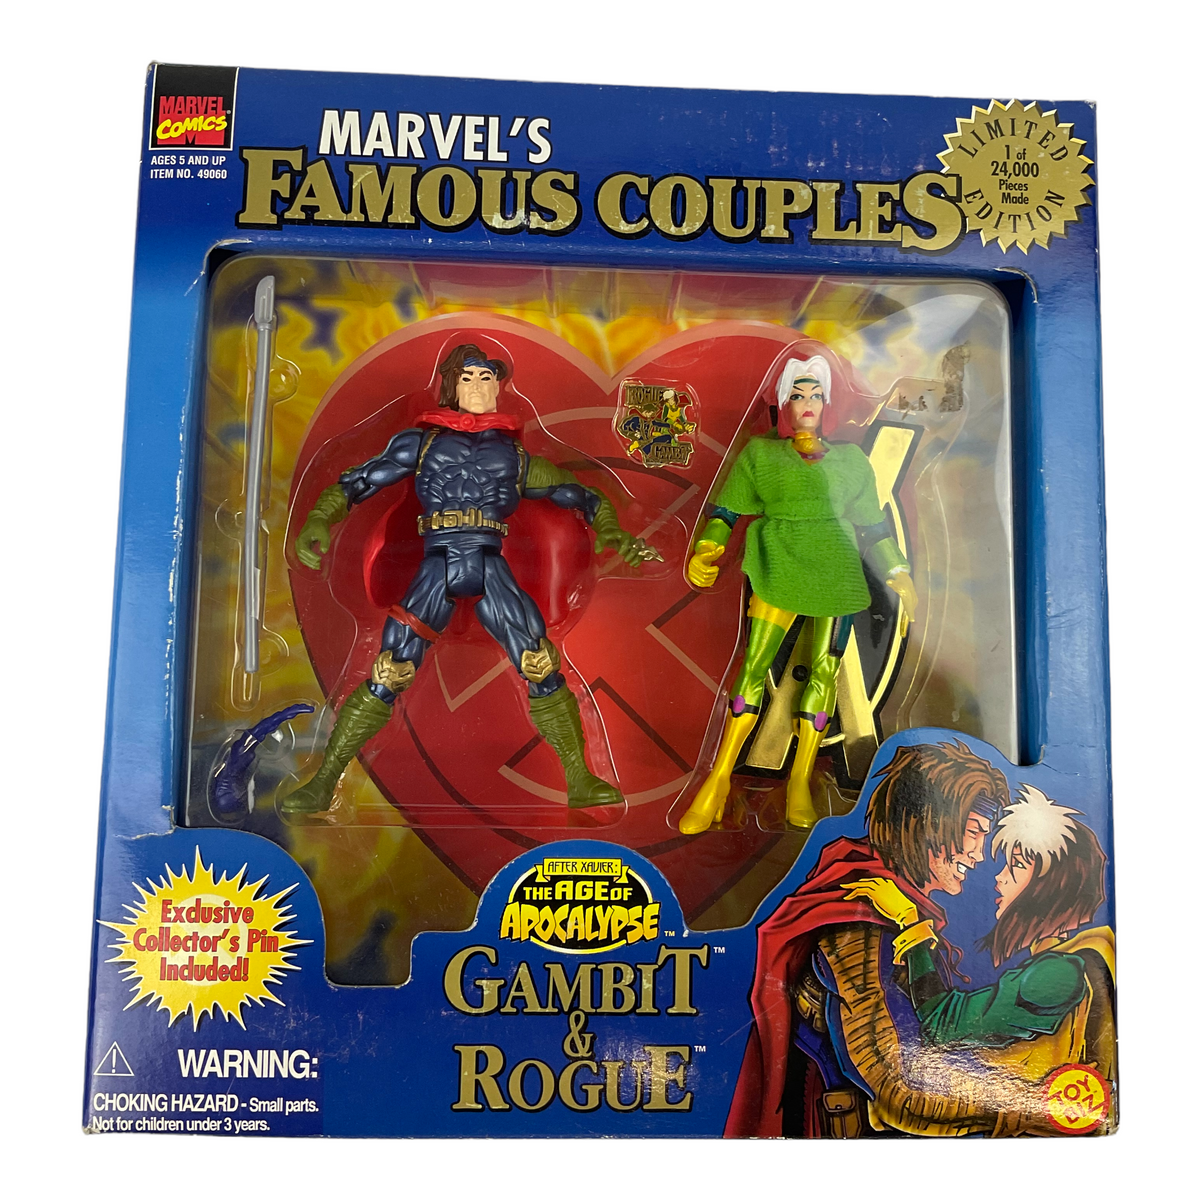 Marvel&#39;s Famous Couples Gambit and Rogue Limited Edition Collector&#39;s Set